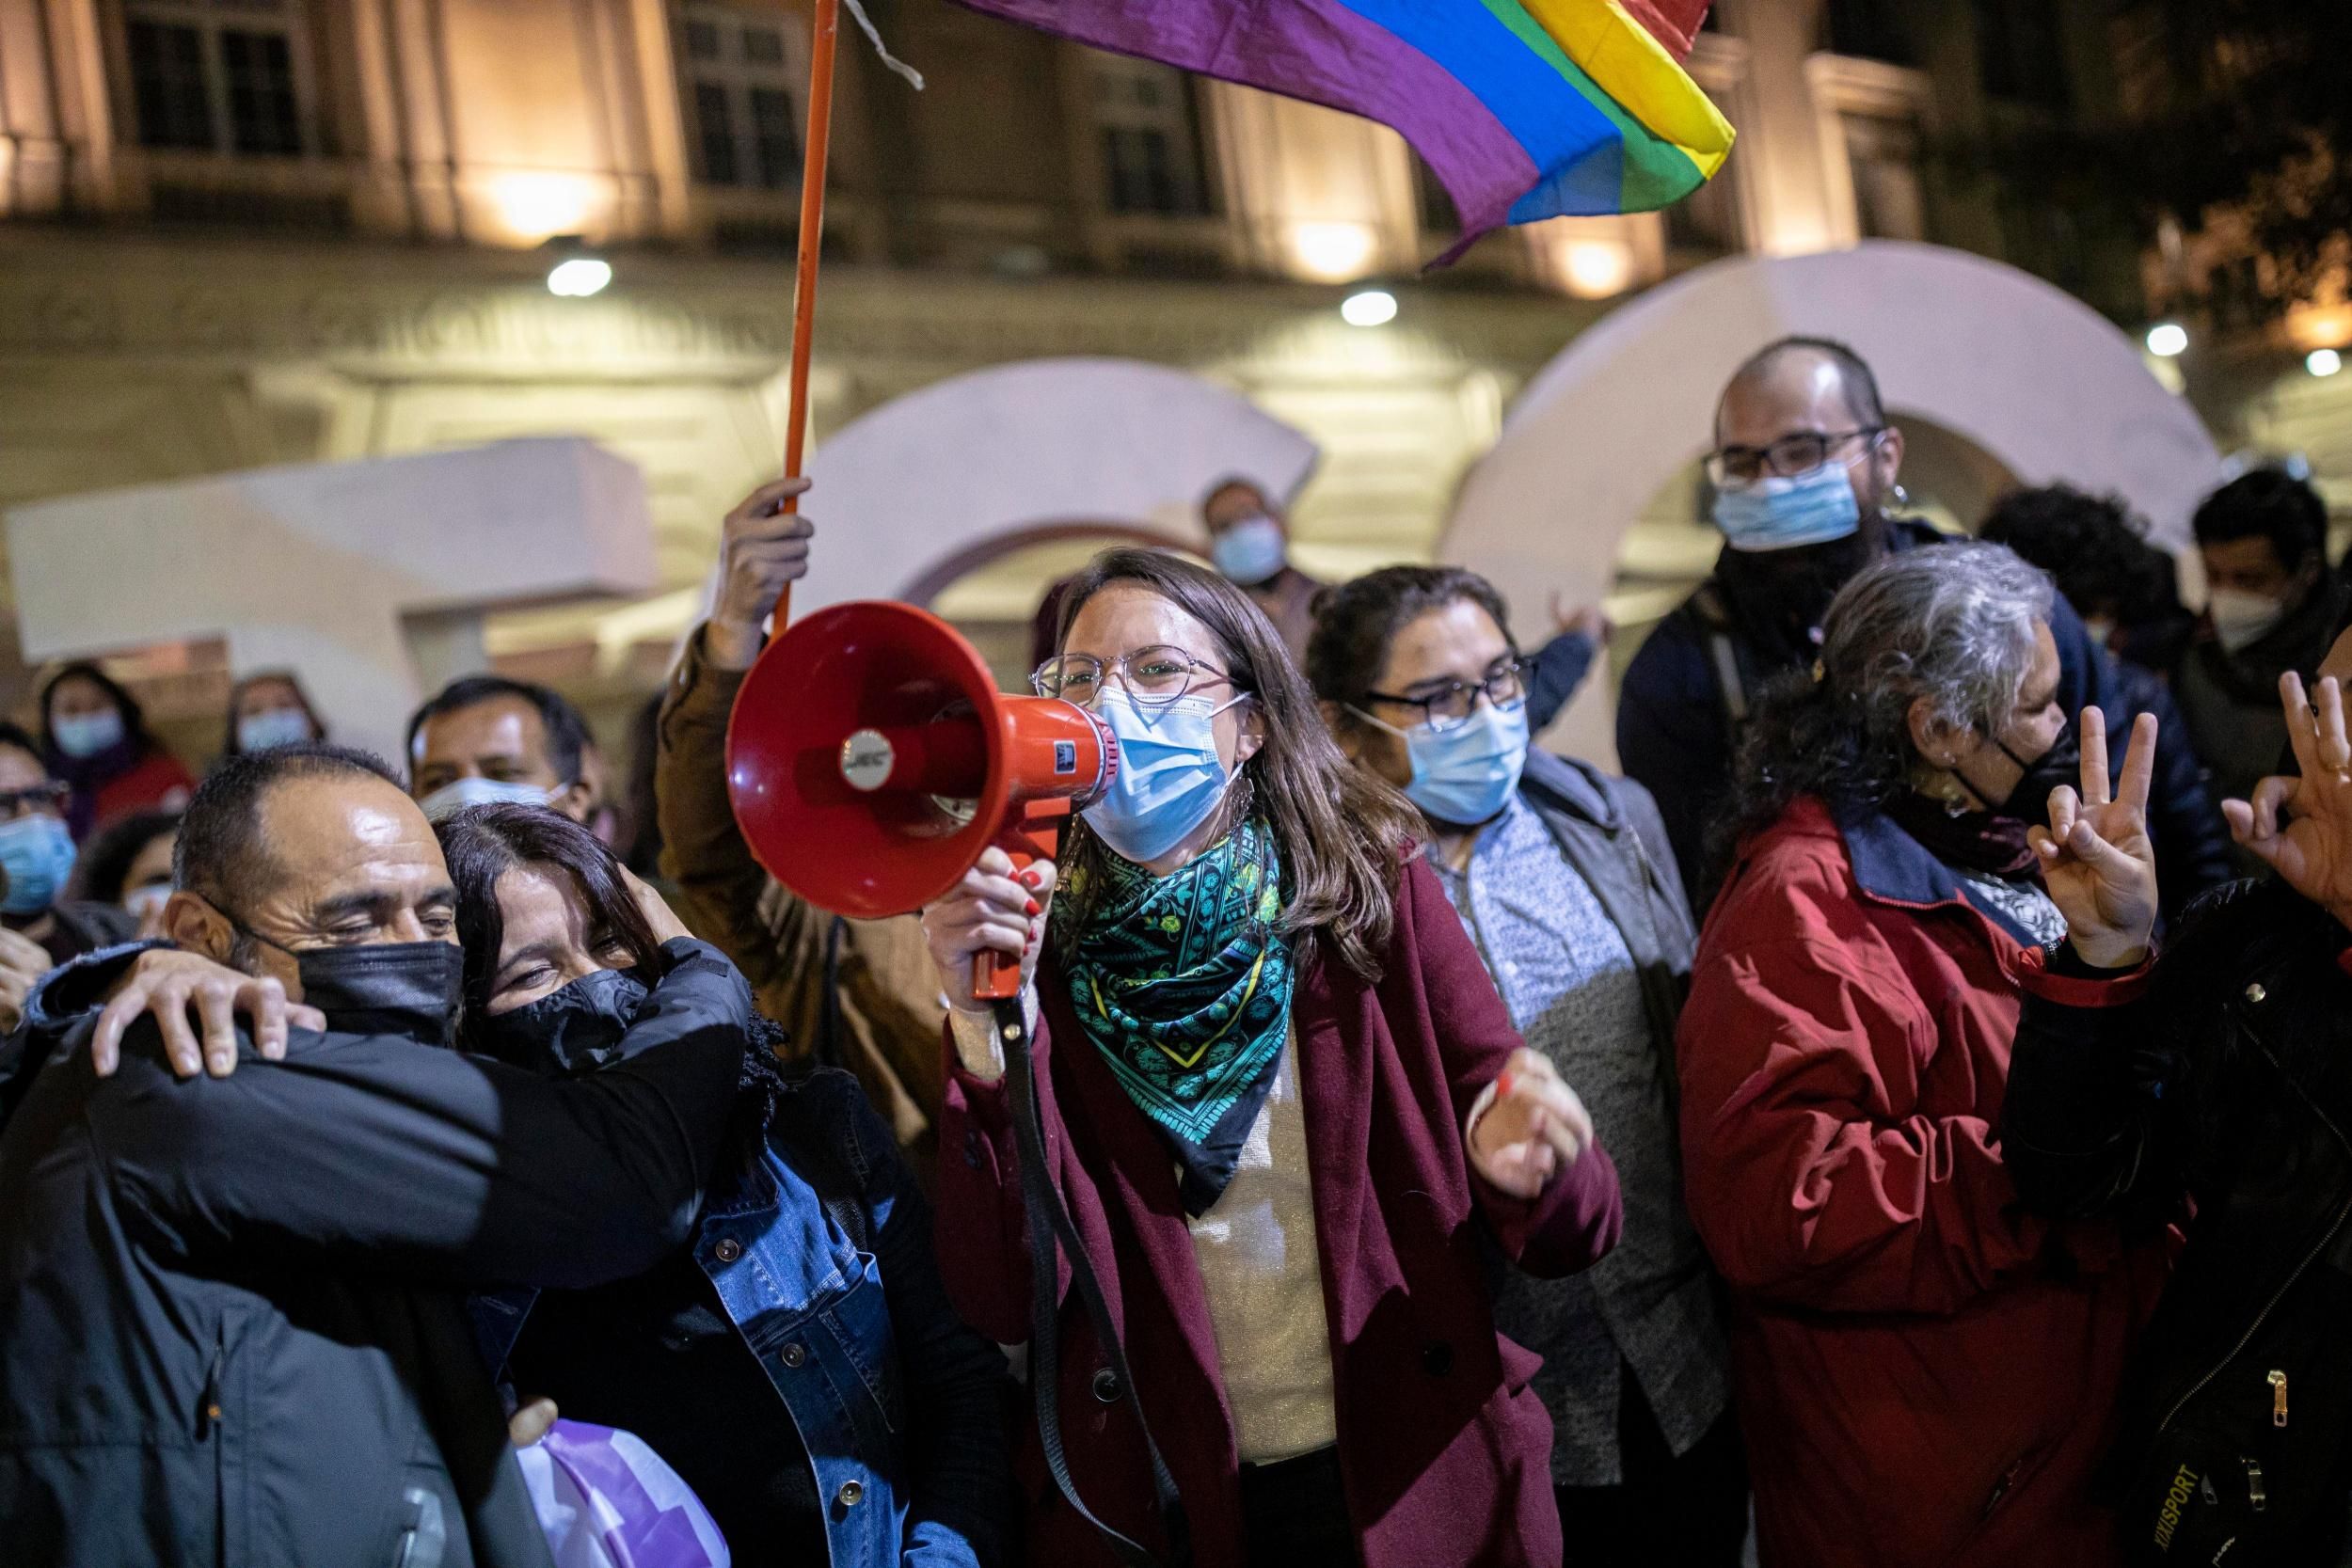 Irací Hassler, the mayor-elect of downtown Santiago, speaks through a megaphone during a celebration in Santiago, Chile on May 17, 2021. (Photo: Felipe Figueroa/SOPA Images/LightRocket via Getty Images)